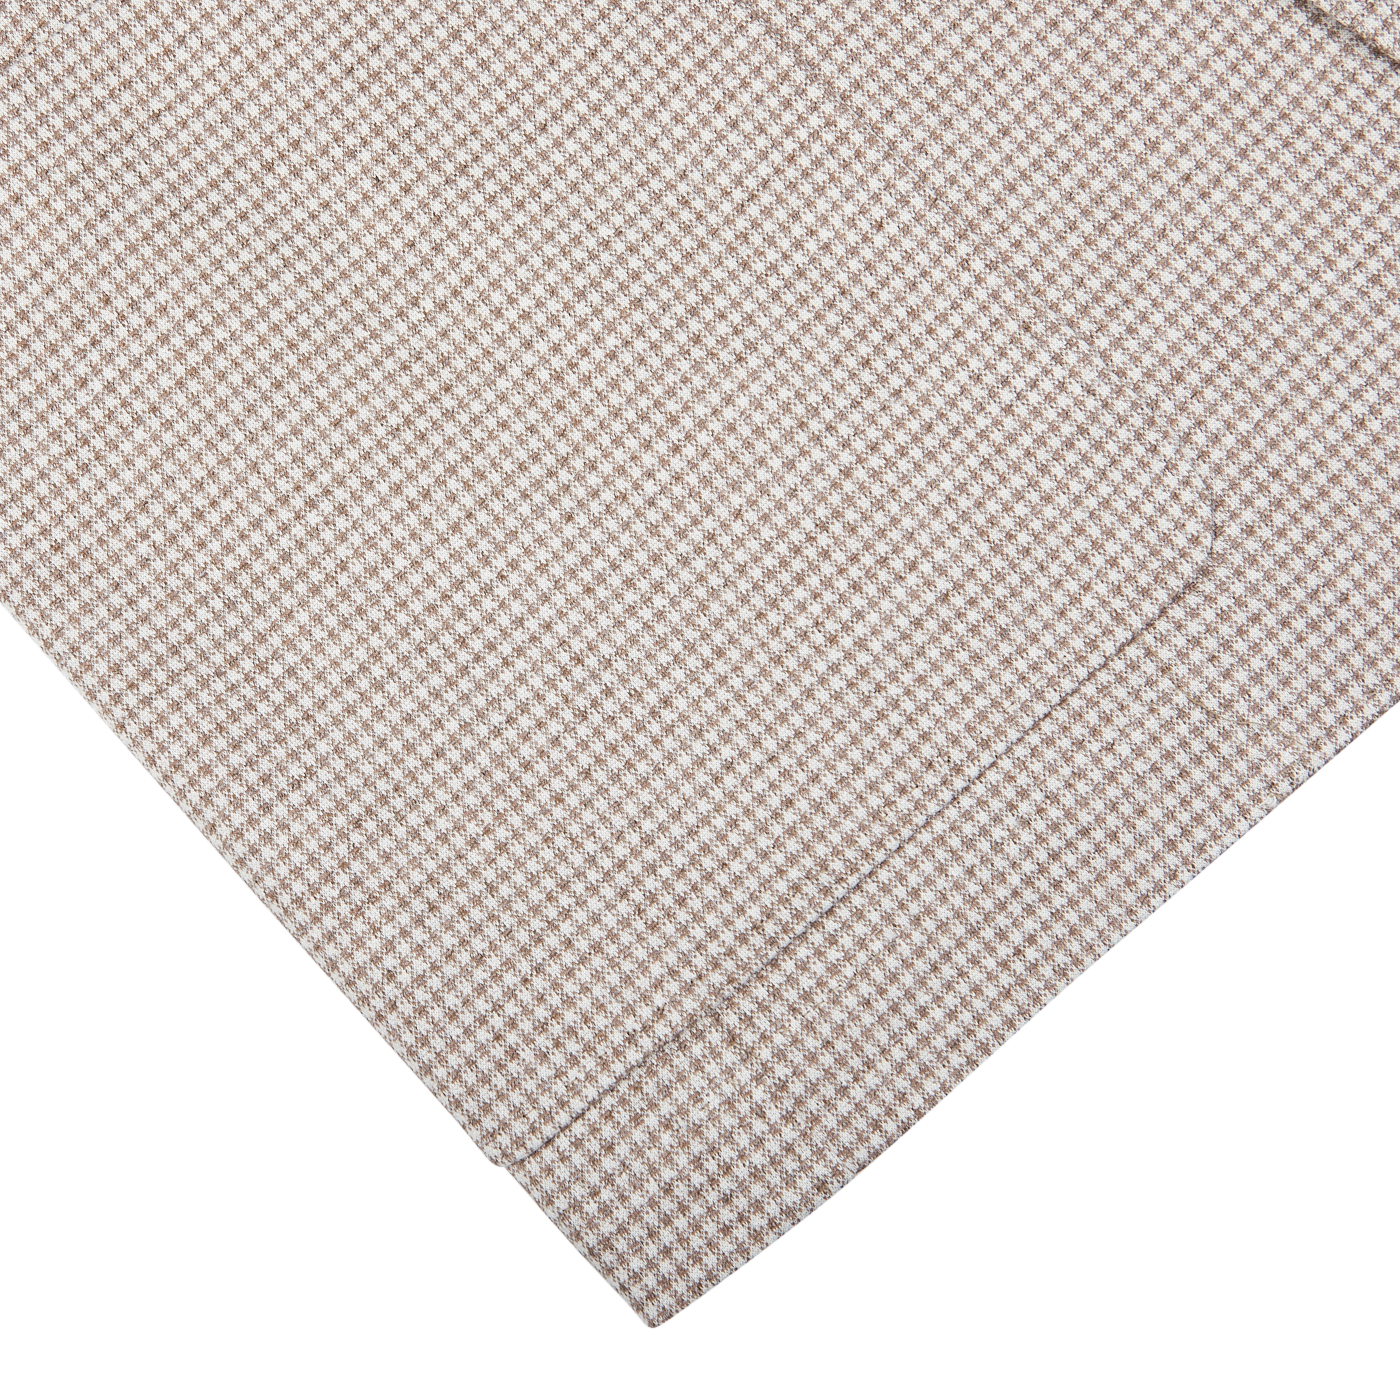 Close-up of a beige houndstooth Canali cotton jersey blazer fabric with a folded corner against a white background.